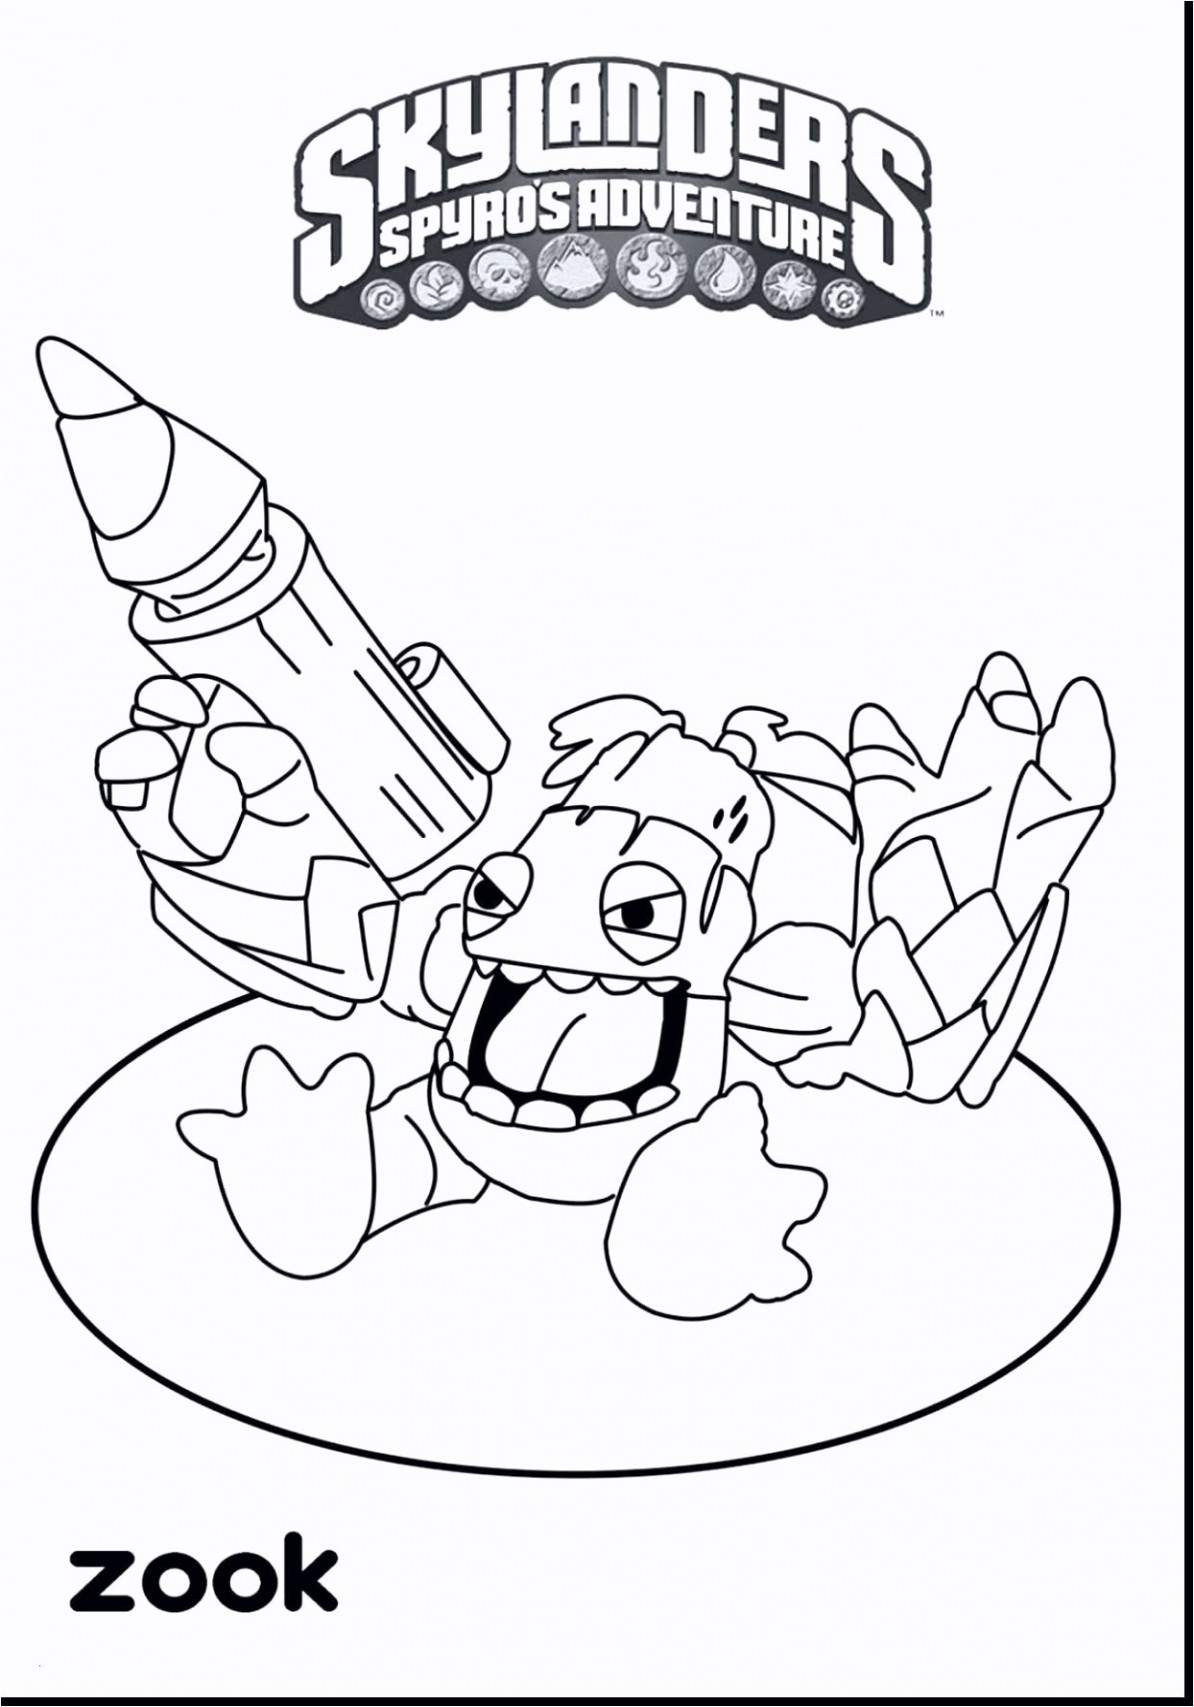 Illuminated Alphabet Coloring Pages Letter G Coloring Sheet Alphabet Coloring Pages For Kids Www